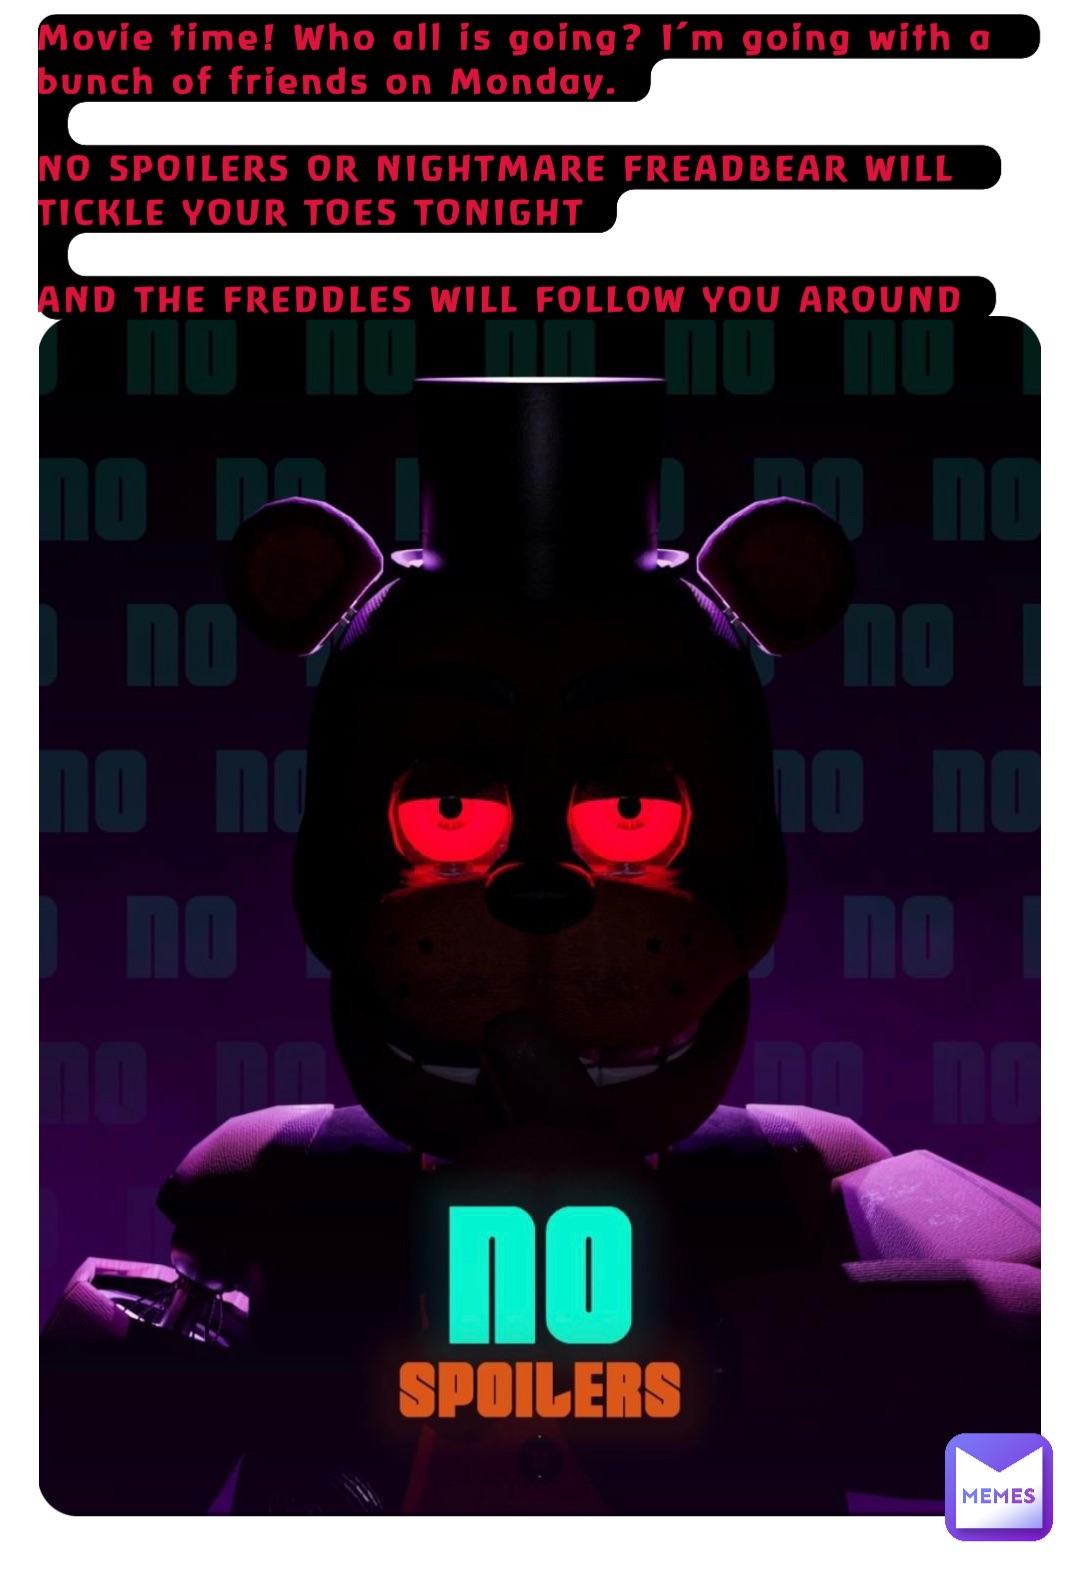 Movie time! Who all is going? I’m going with a bunch of friends on Monday.

NO SPOILERS OR NIGHTMARE FREADBEAR WILL TICKLE YOUR TOES TONIGHT

AND THE FREDDLES WILL FOLLOW YOU AROUND